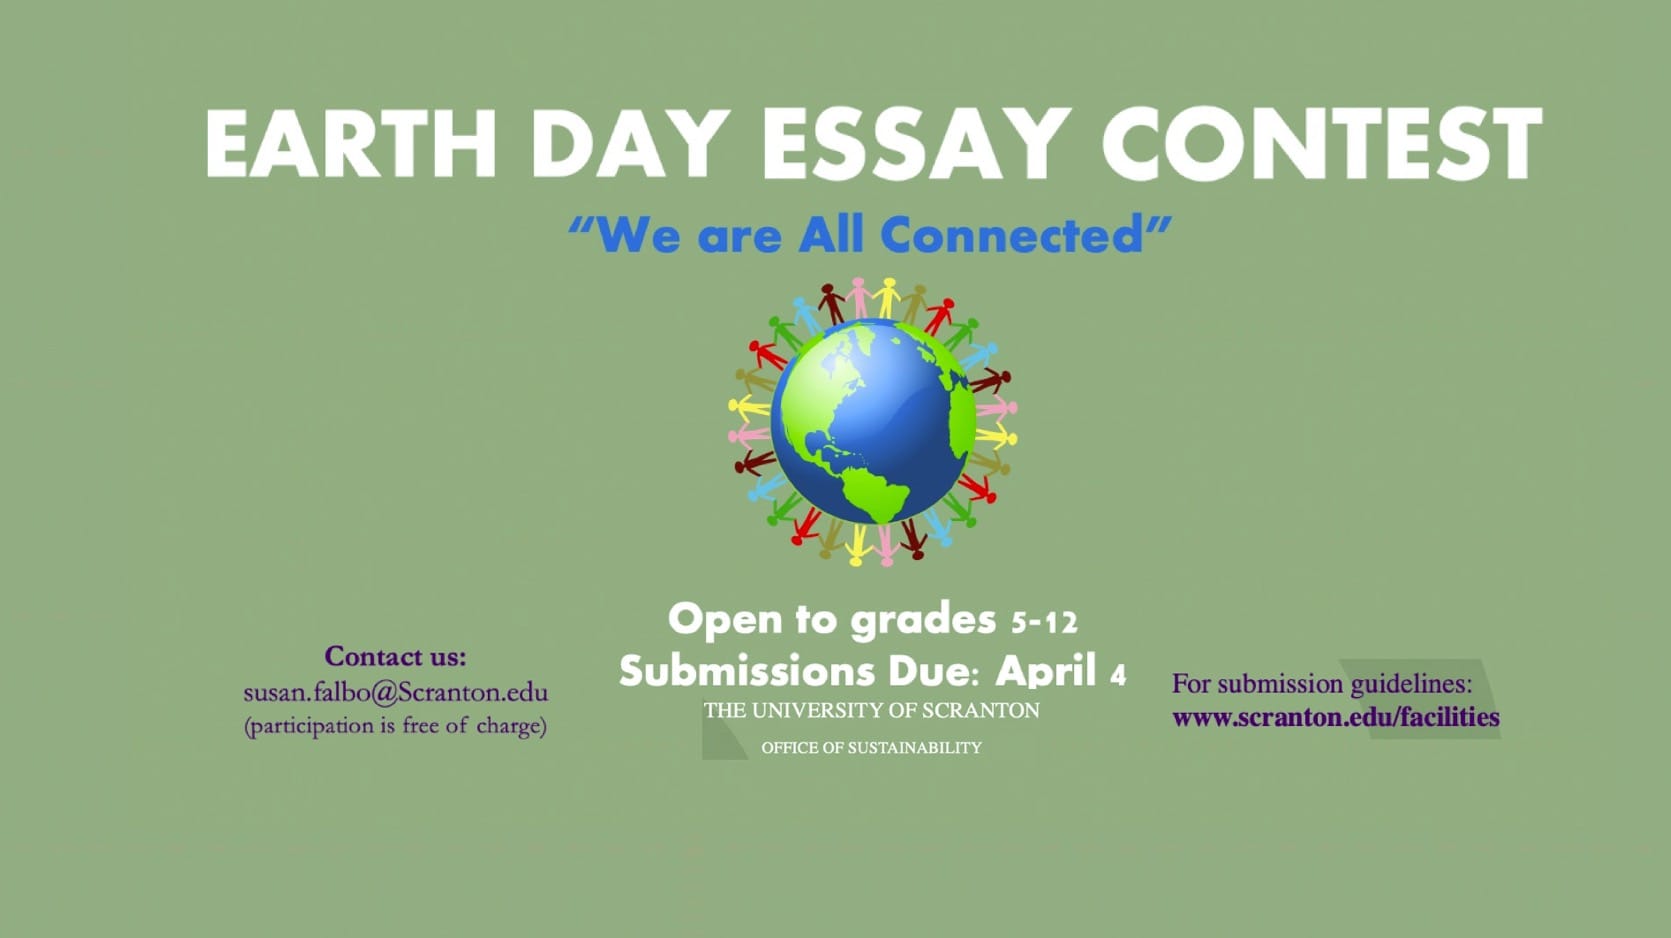 The University is holding an Earth Day Essay Contest for students in grades five through 12. This year’s essay theme is “We Are All Connected.” Submissions must be sent electronically on or before April 4.